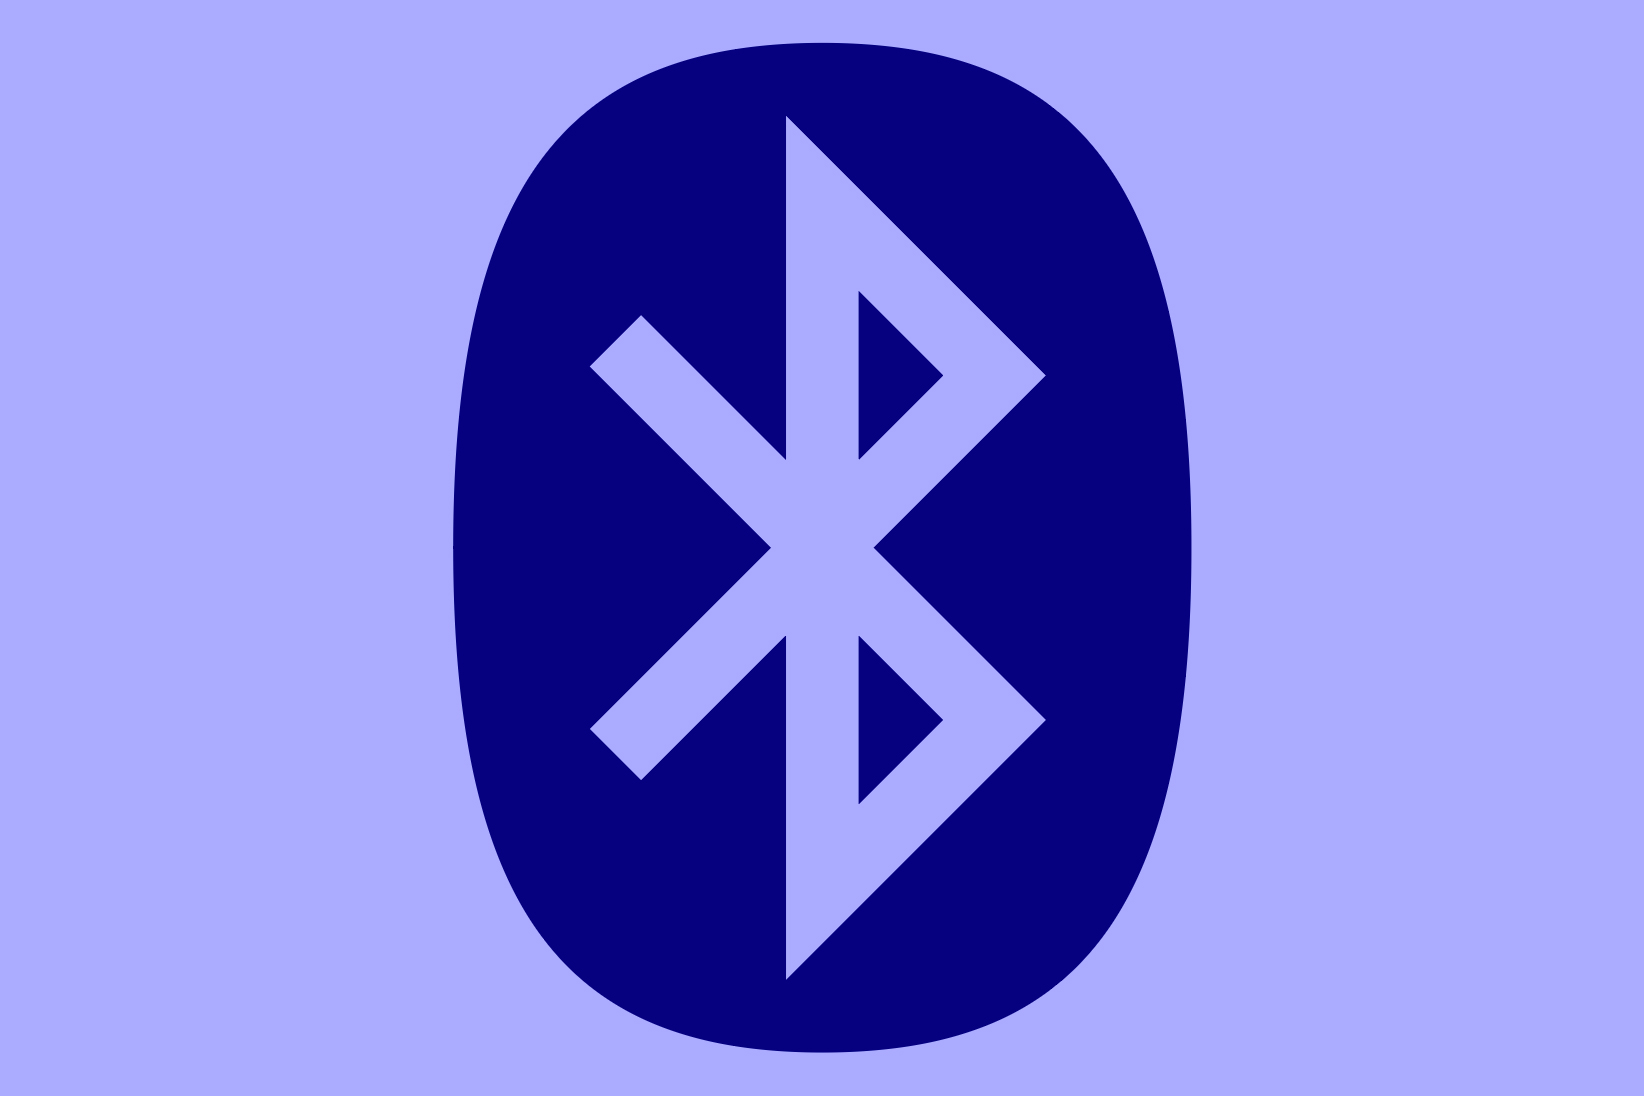 The Bluetooth symbol accurately crafted in Adobe Illustraor